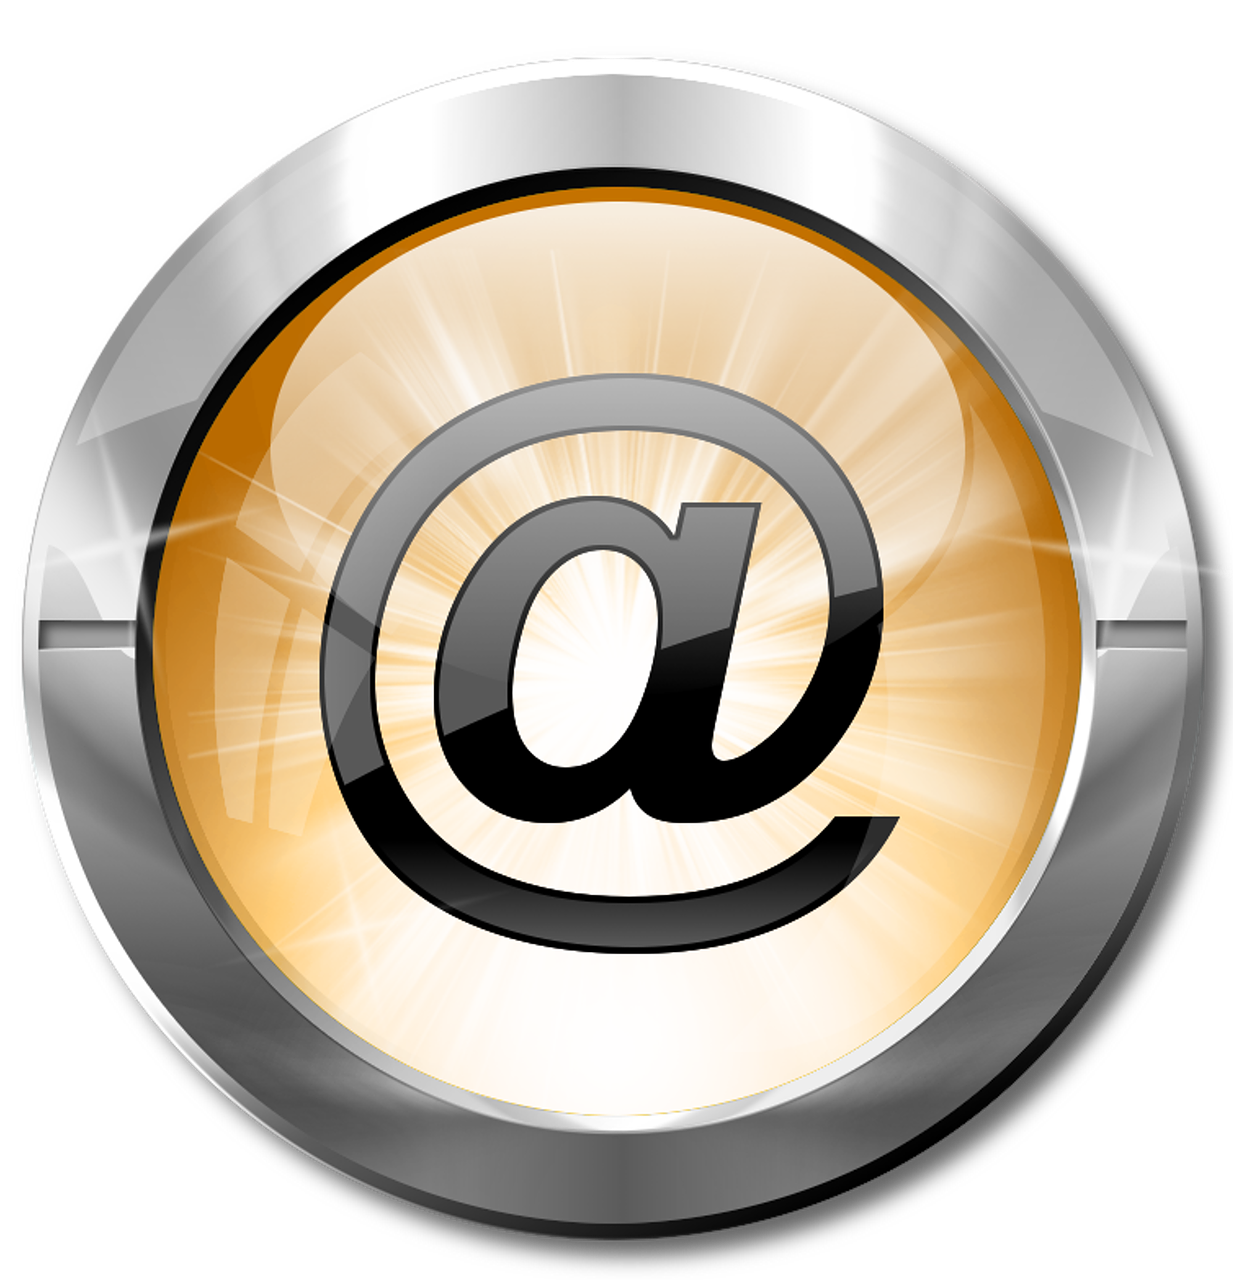 email icon 2d free photo